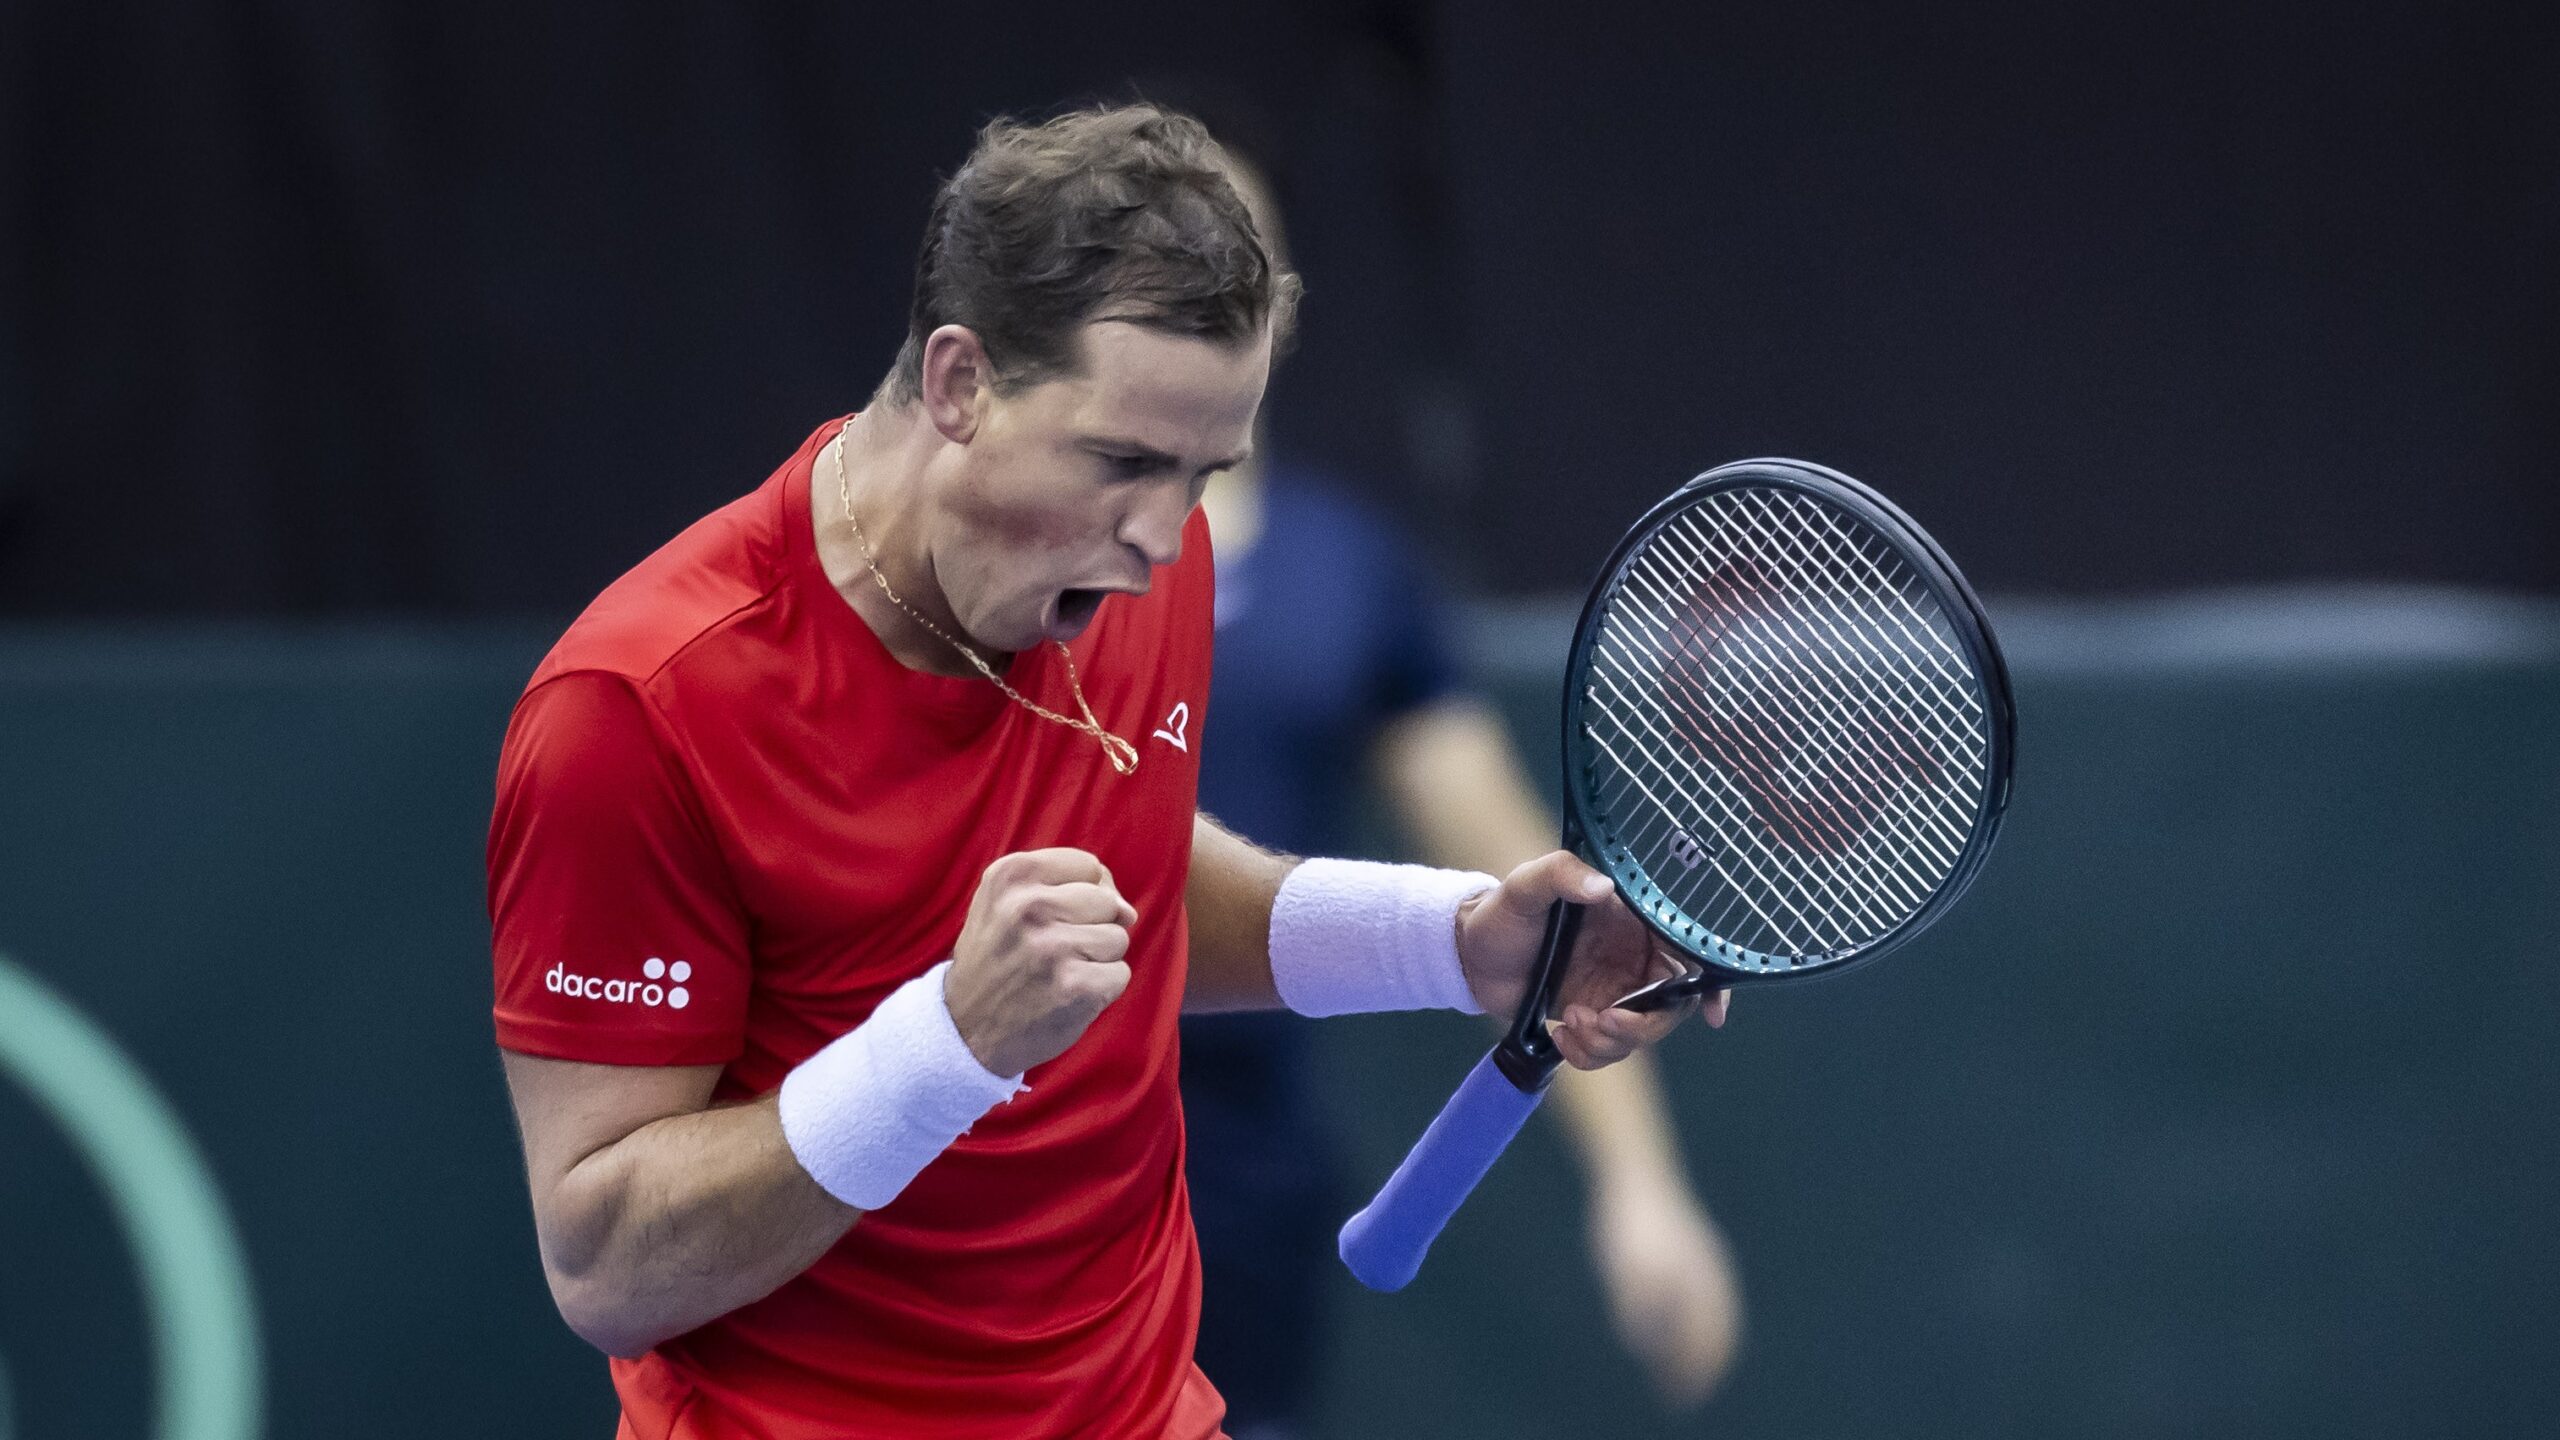 Vasek Pospisil pumps his fist and yells. He and Gabriel Diallo both won on Friday at the Davis Cup in Montreal.